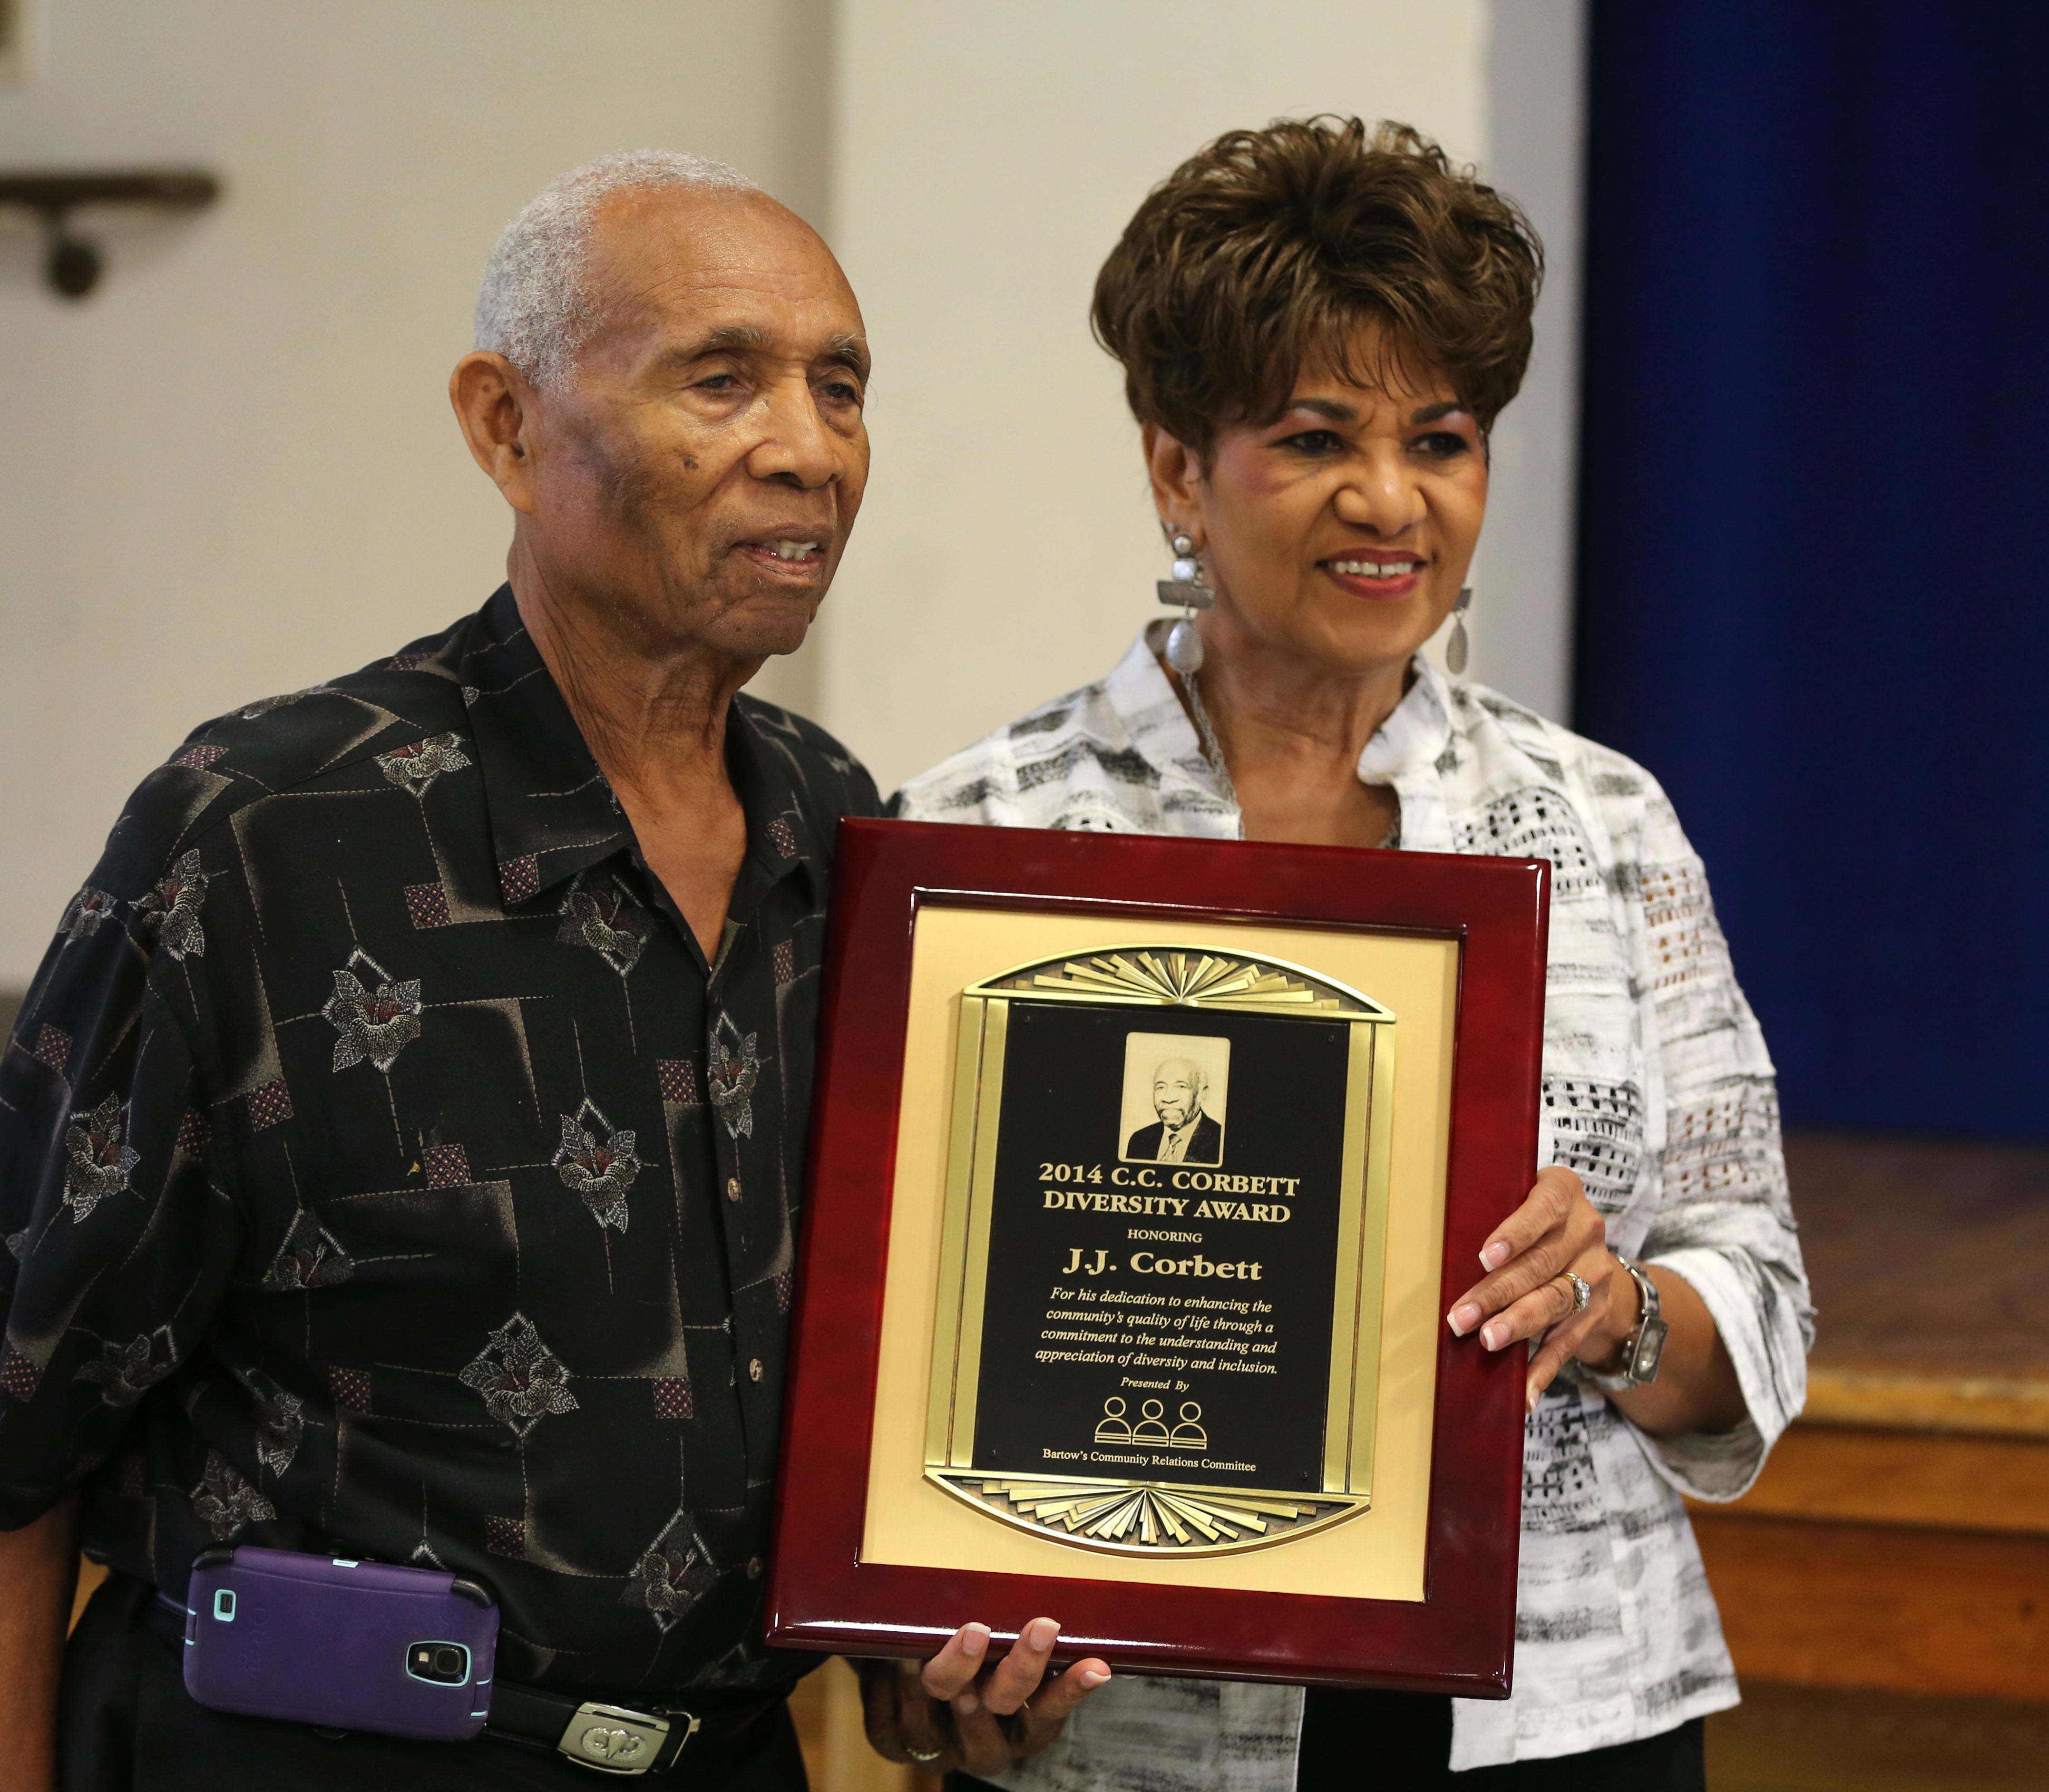 J.J. Corbett, left, accepts the 2014 C.C. Corbett Diversity Award for an individual from 2013 winner Joyce Thurman during the Community Relations Committee Diversity Luncheon at the Bartow Civic Center on Sept. 17, 2014.